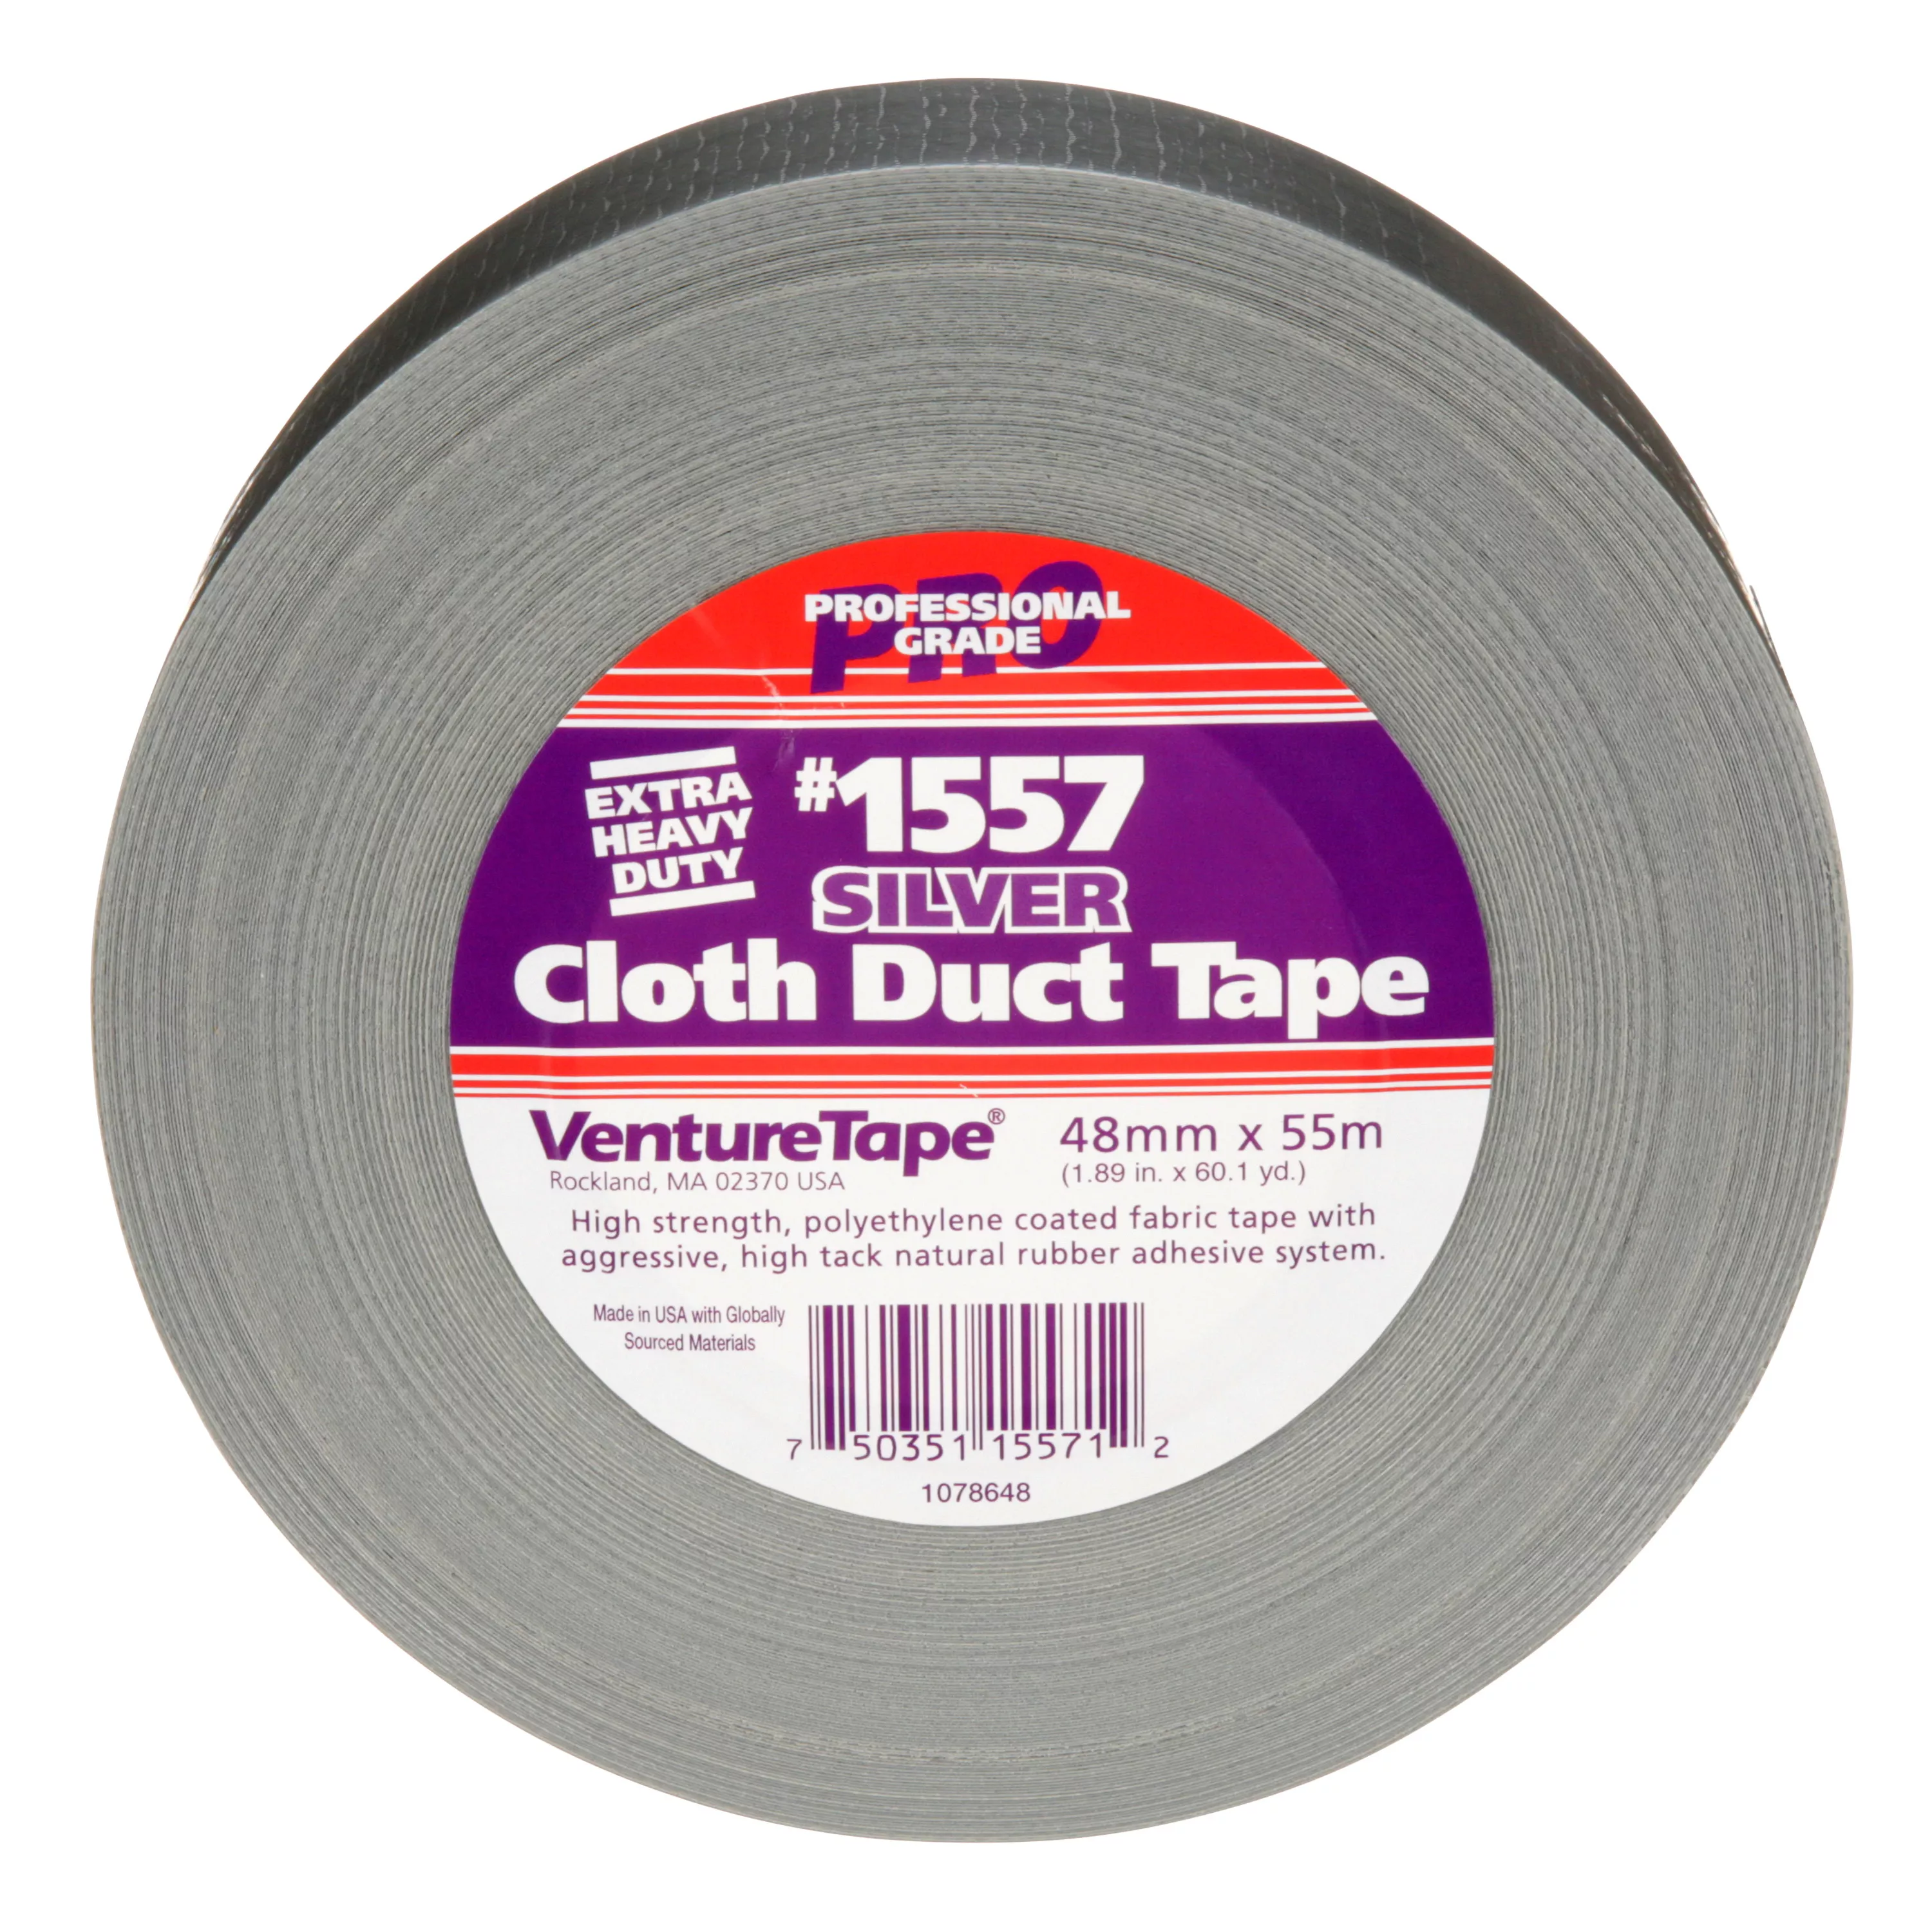 3M™ Venture Tape™ Extreme Cloth Duct Tape 1557, Silver, 48 mm x 55 m
(1.88 in x 60.1 yd), 24/Case